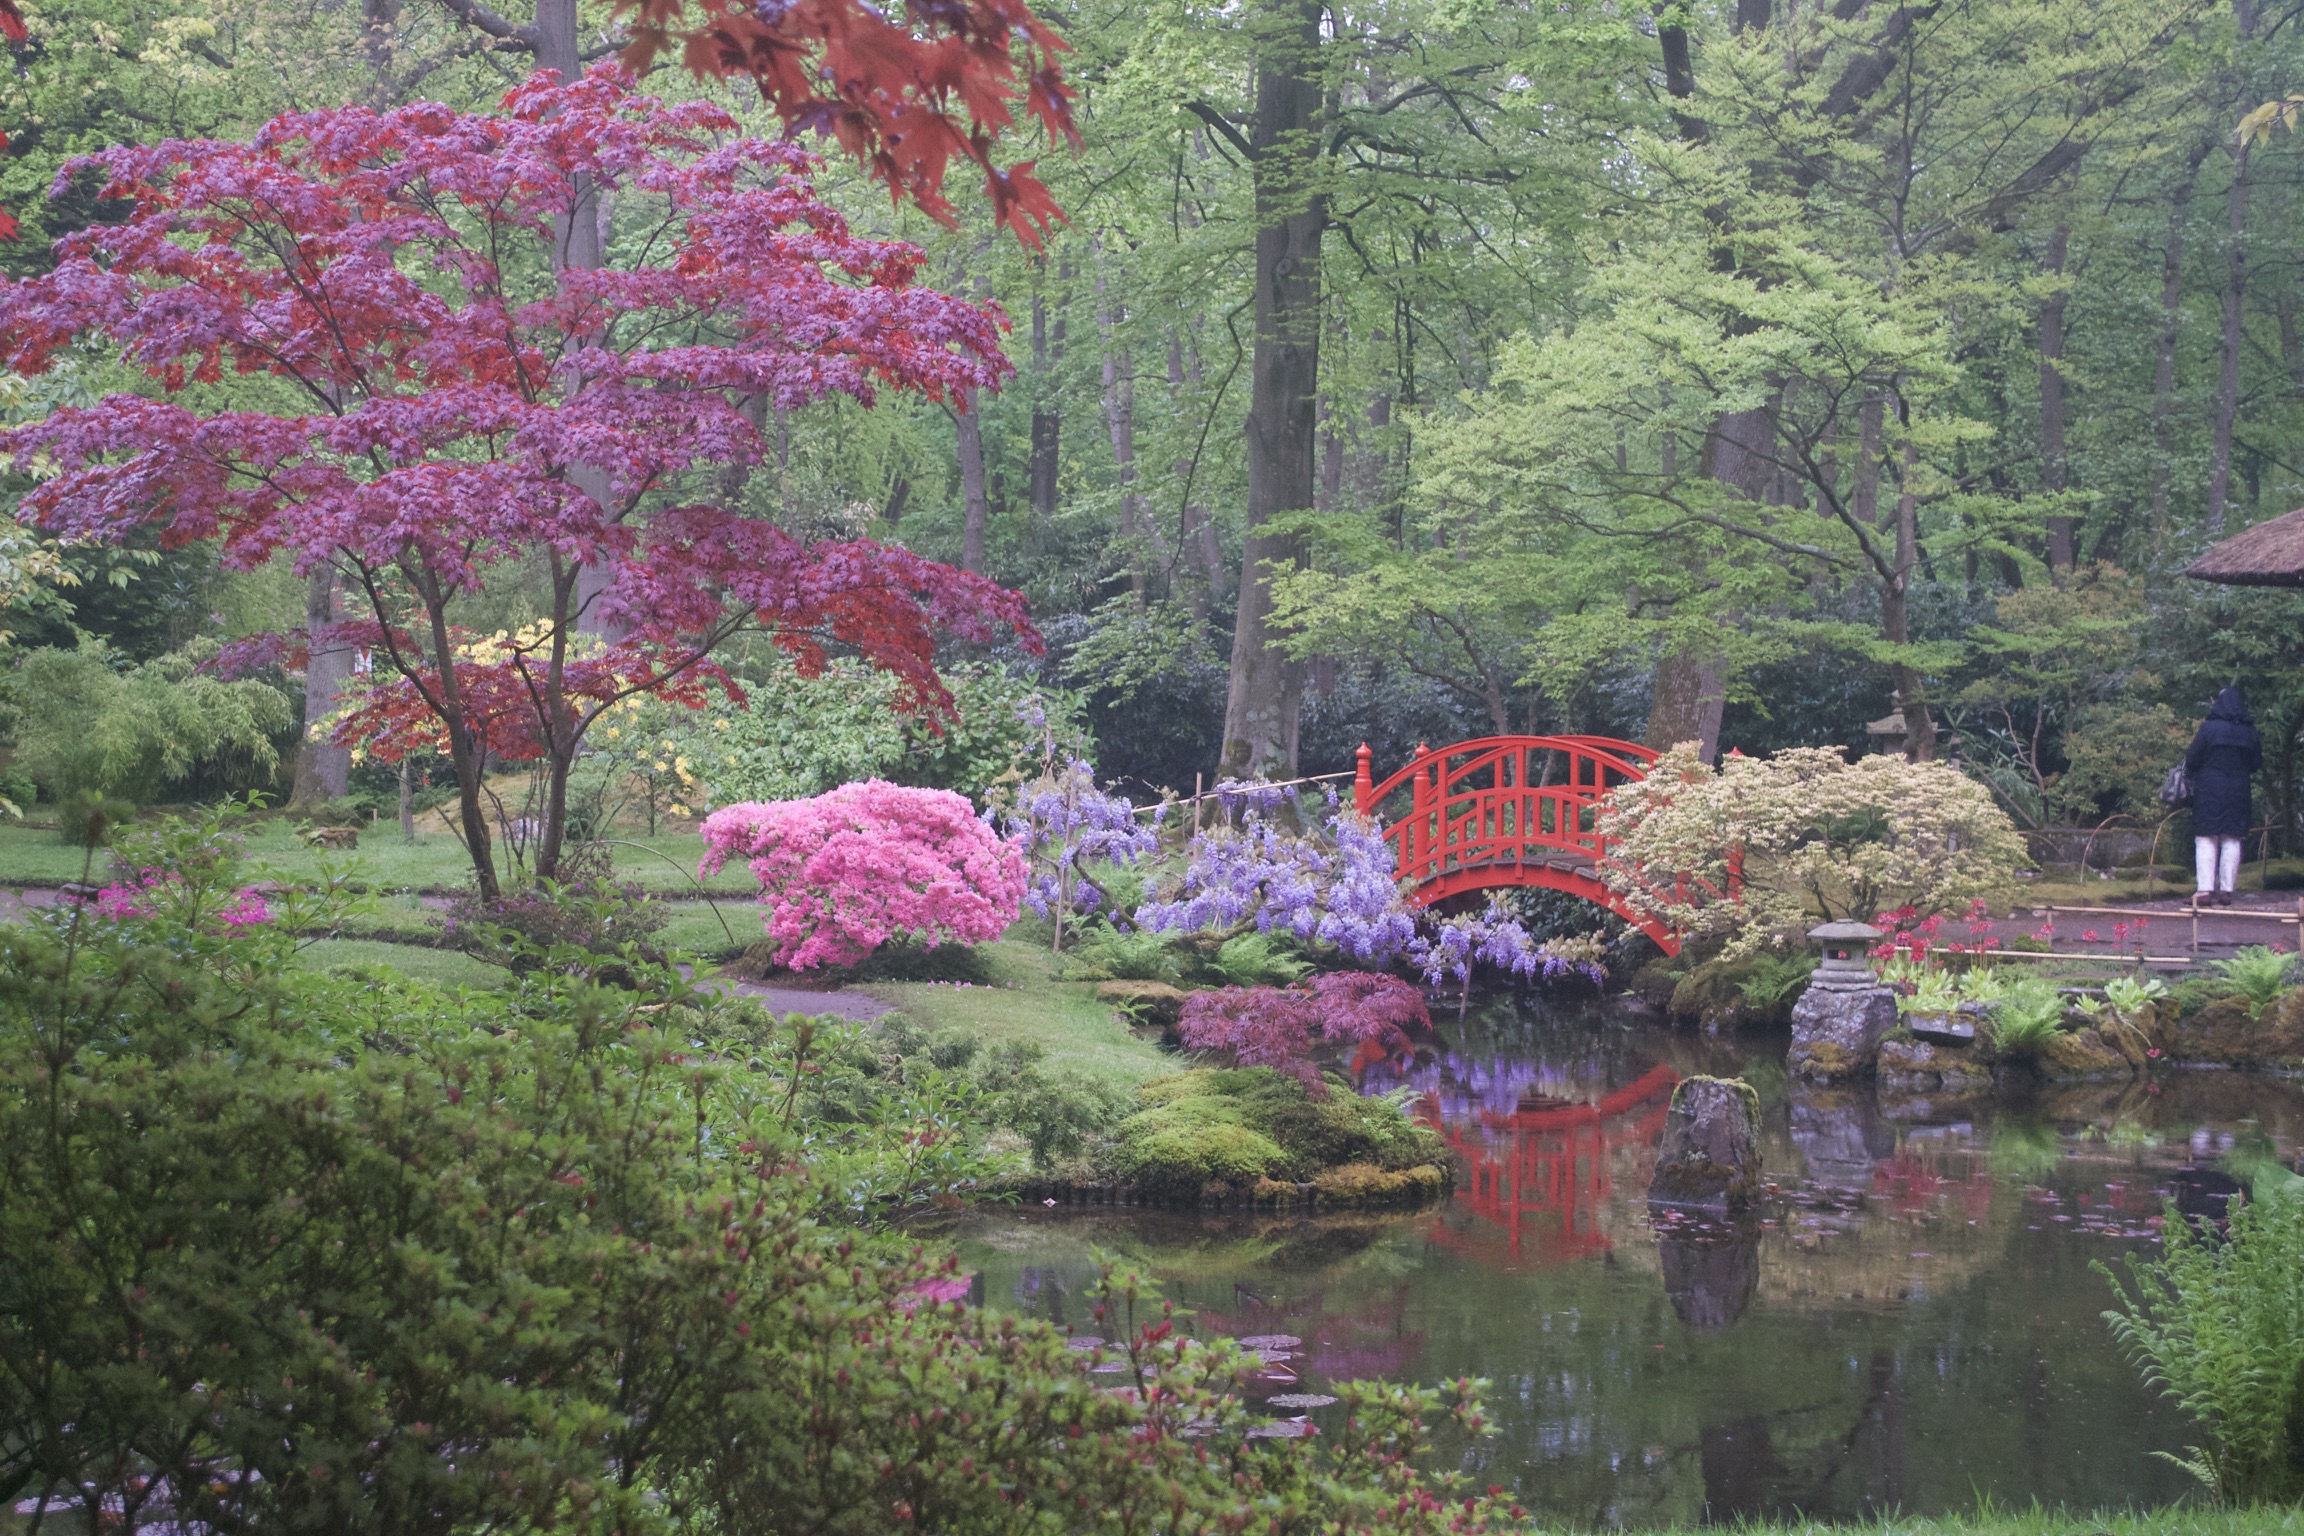 A blooming Japanese garden, with brightly colored plants surrounding a still pond.  A red arched bridge spans a narrow inlet in the background.